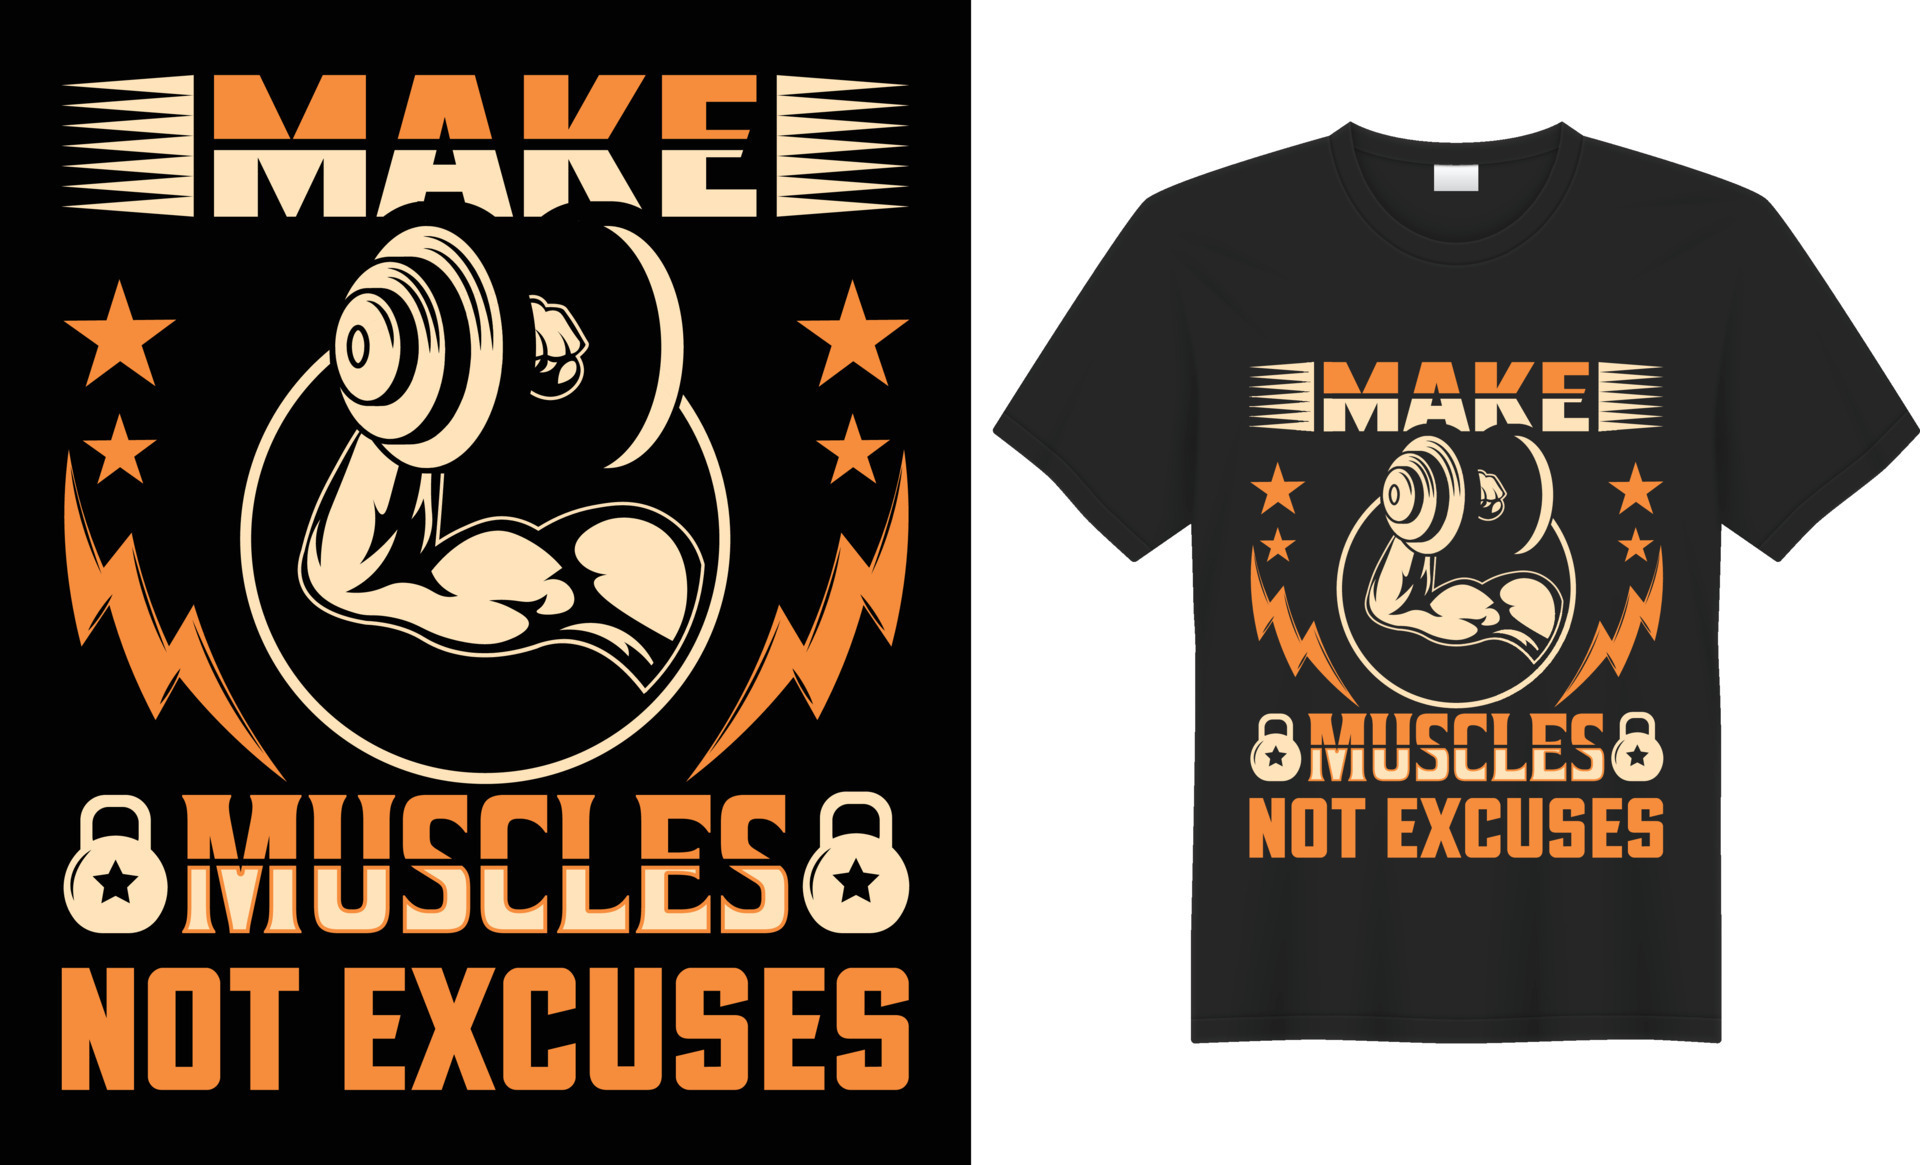 Gym shirt, Fitness t shirt design.Gym motivational quote with grunge